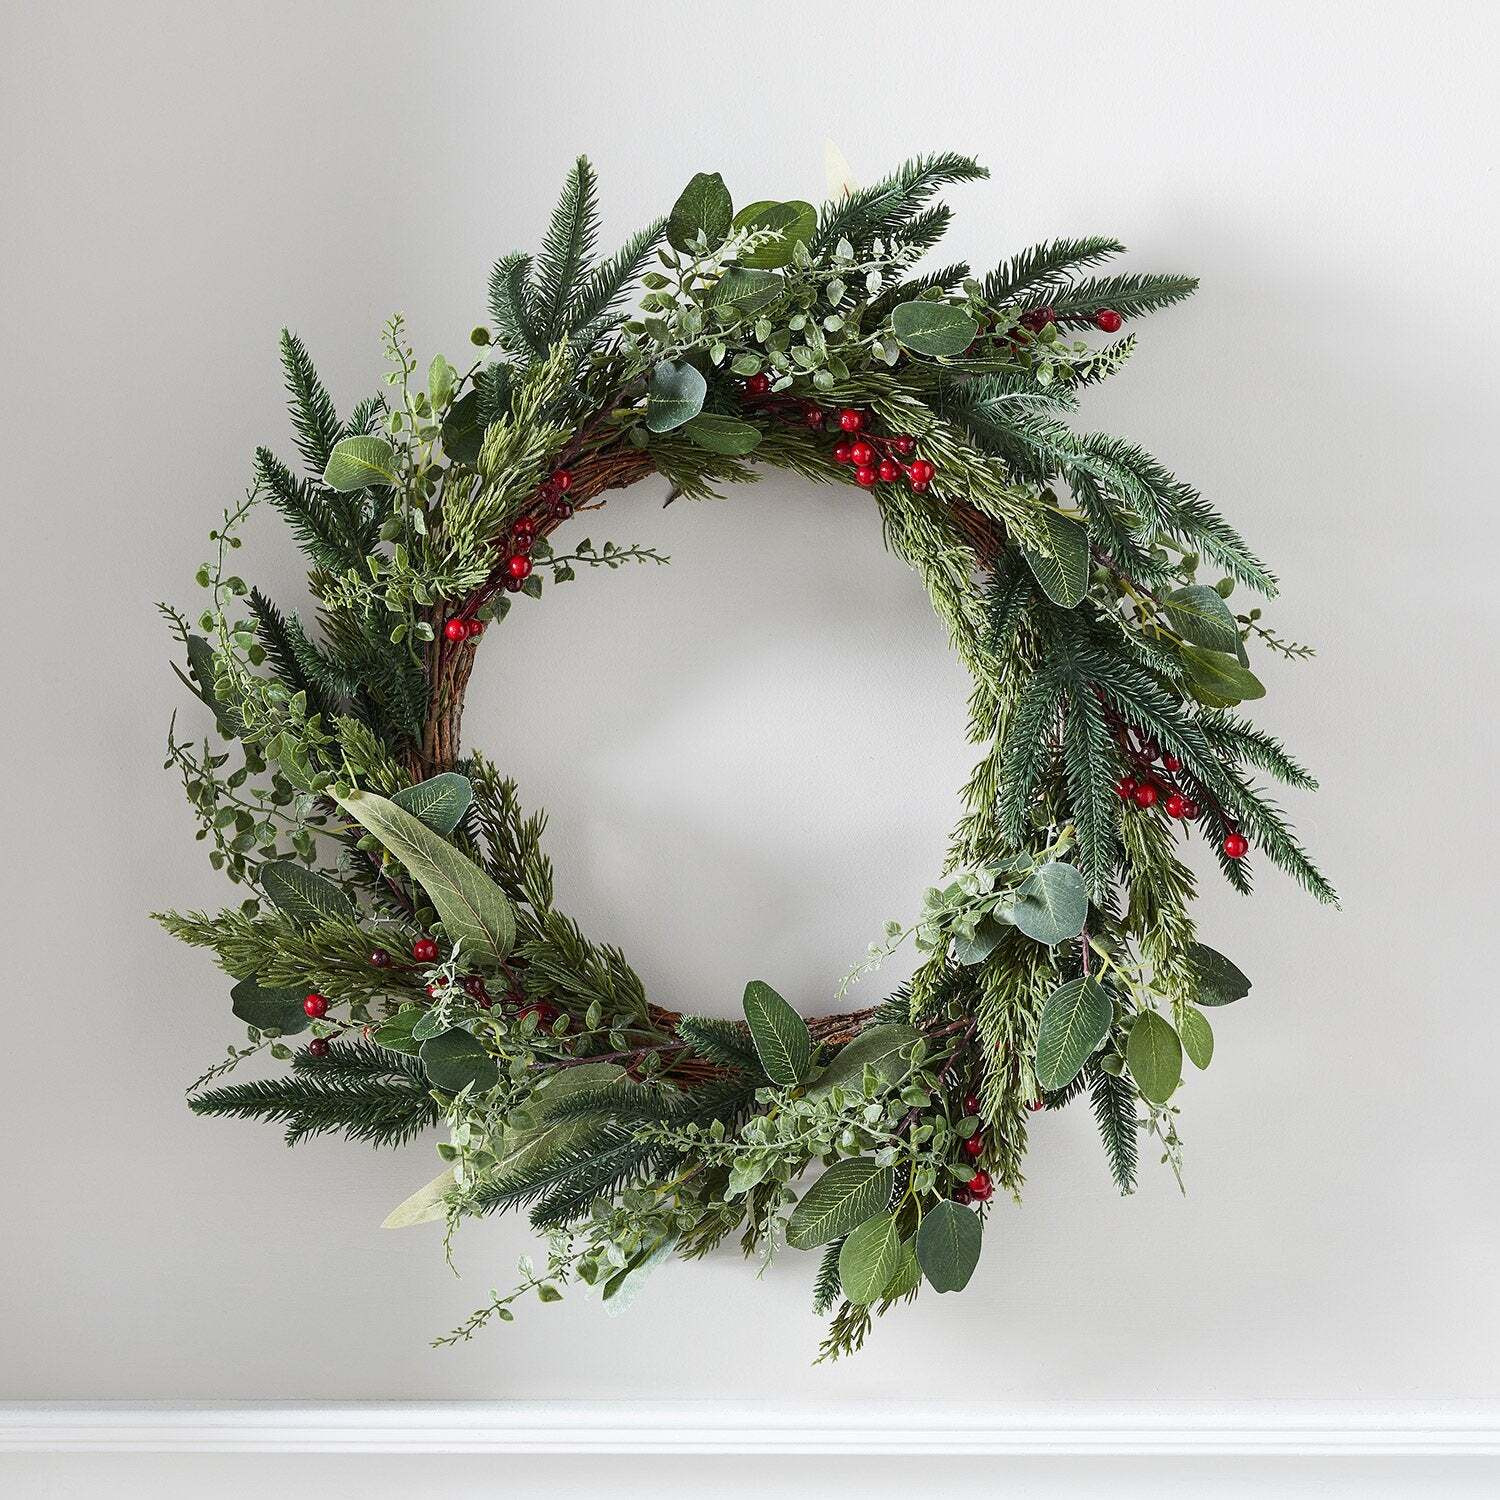 45cm Pine Wreath with Red Berries - image 1